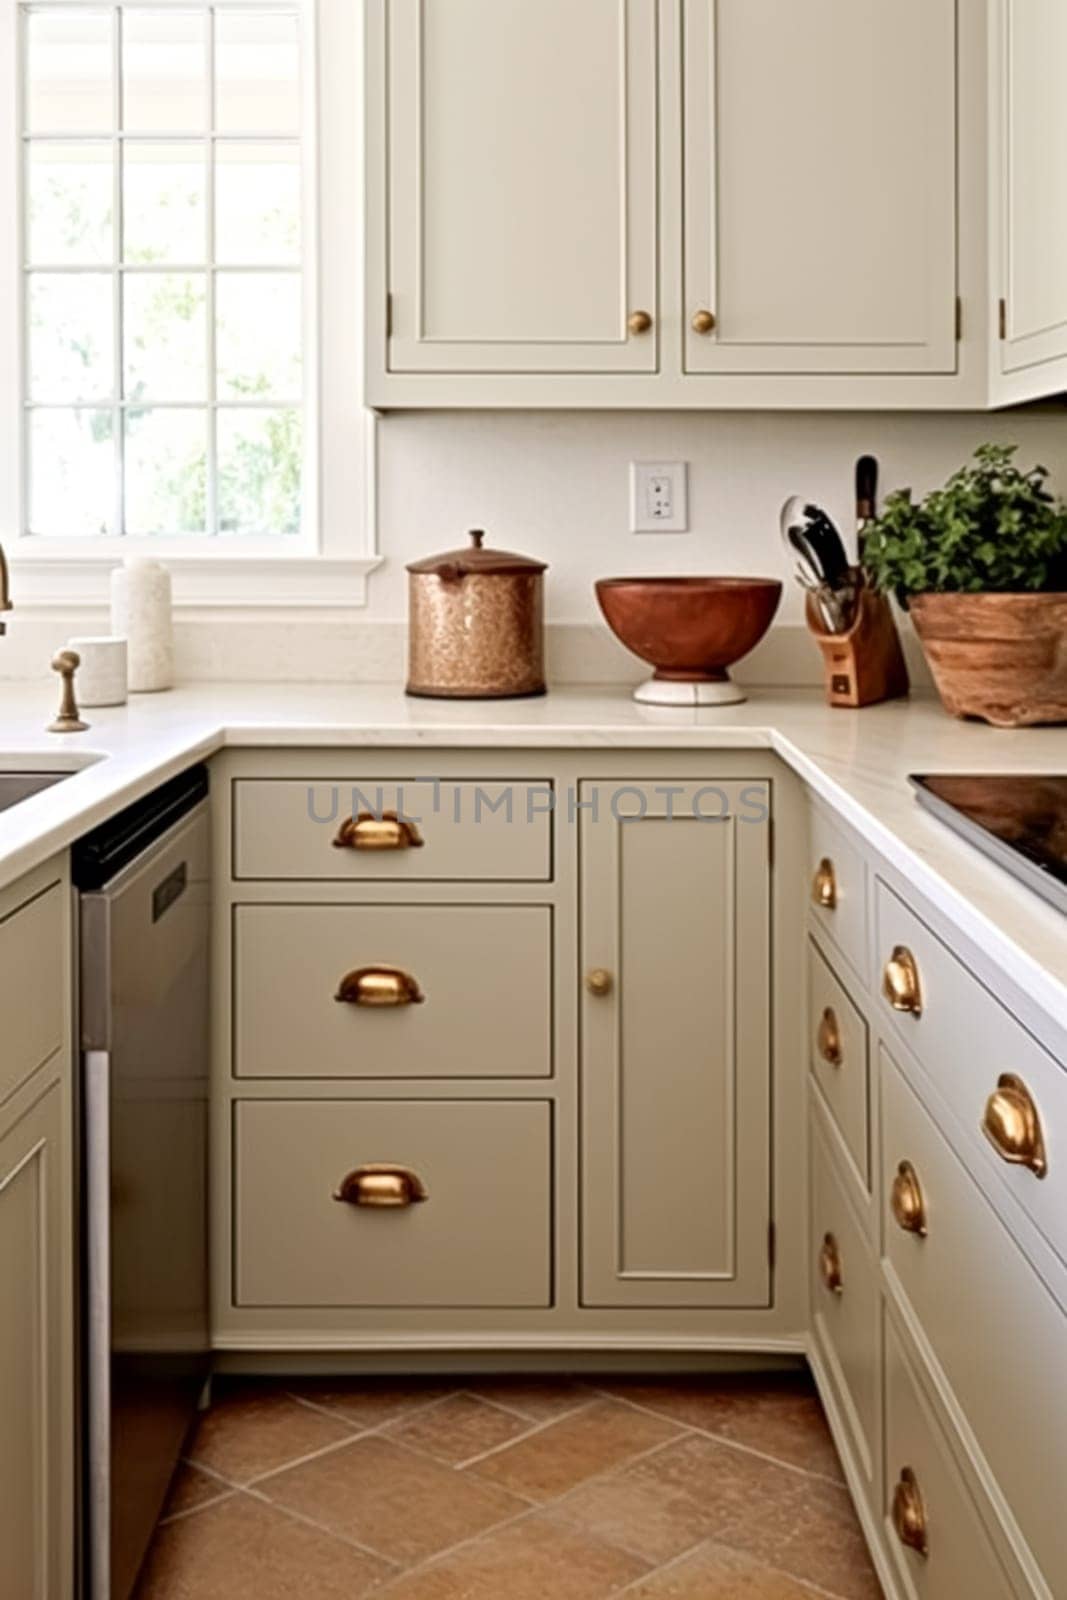 Cream white cottage kitchen decor, interior design and house improvement, English in frame kitchen cabinets in a countryside house, elegant country style motif